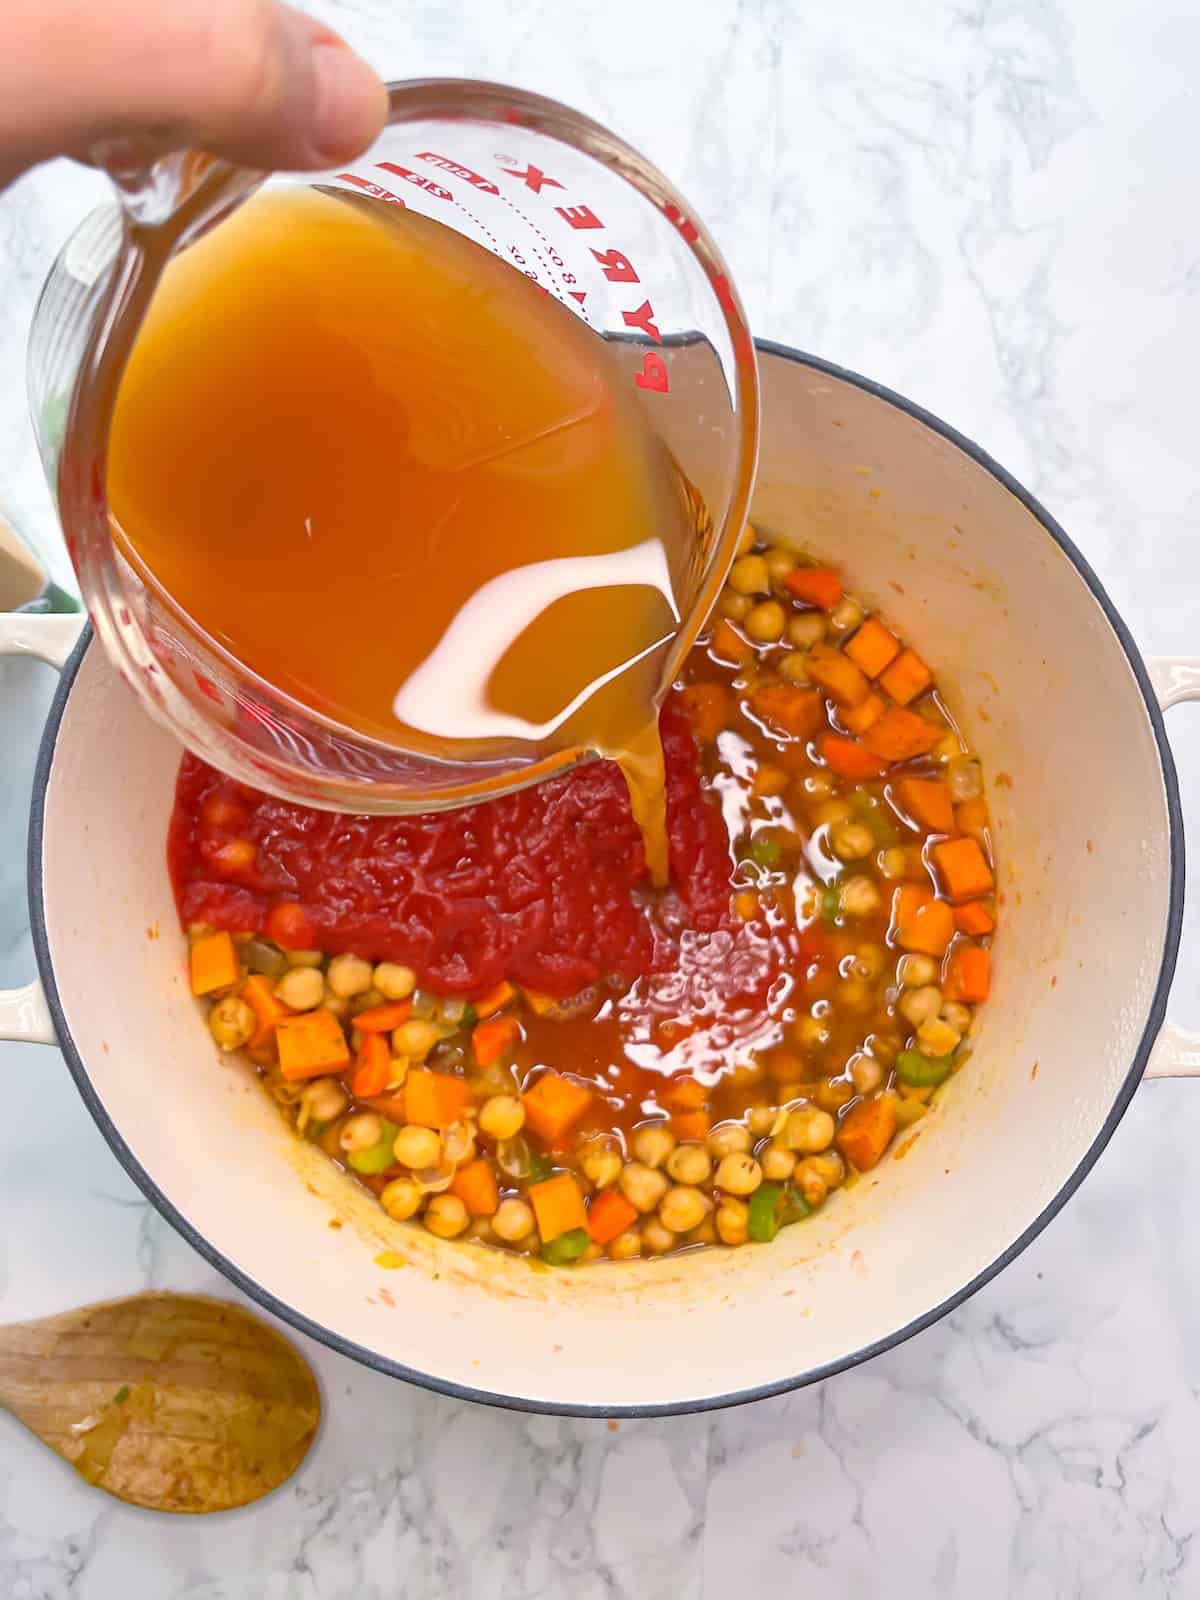 Vegetable broth being poured into vegan chickpea soup over tomato sauce